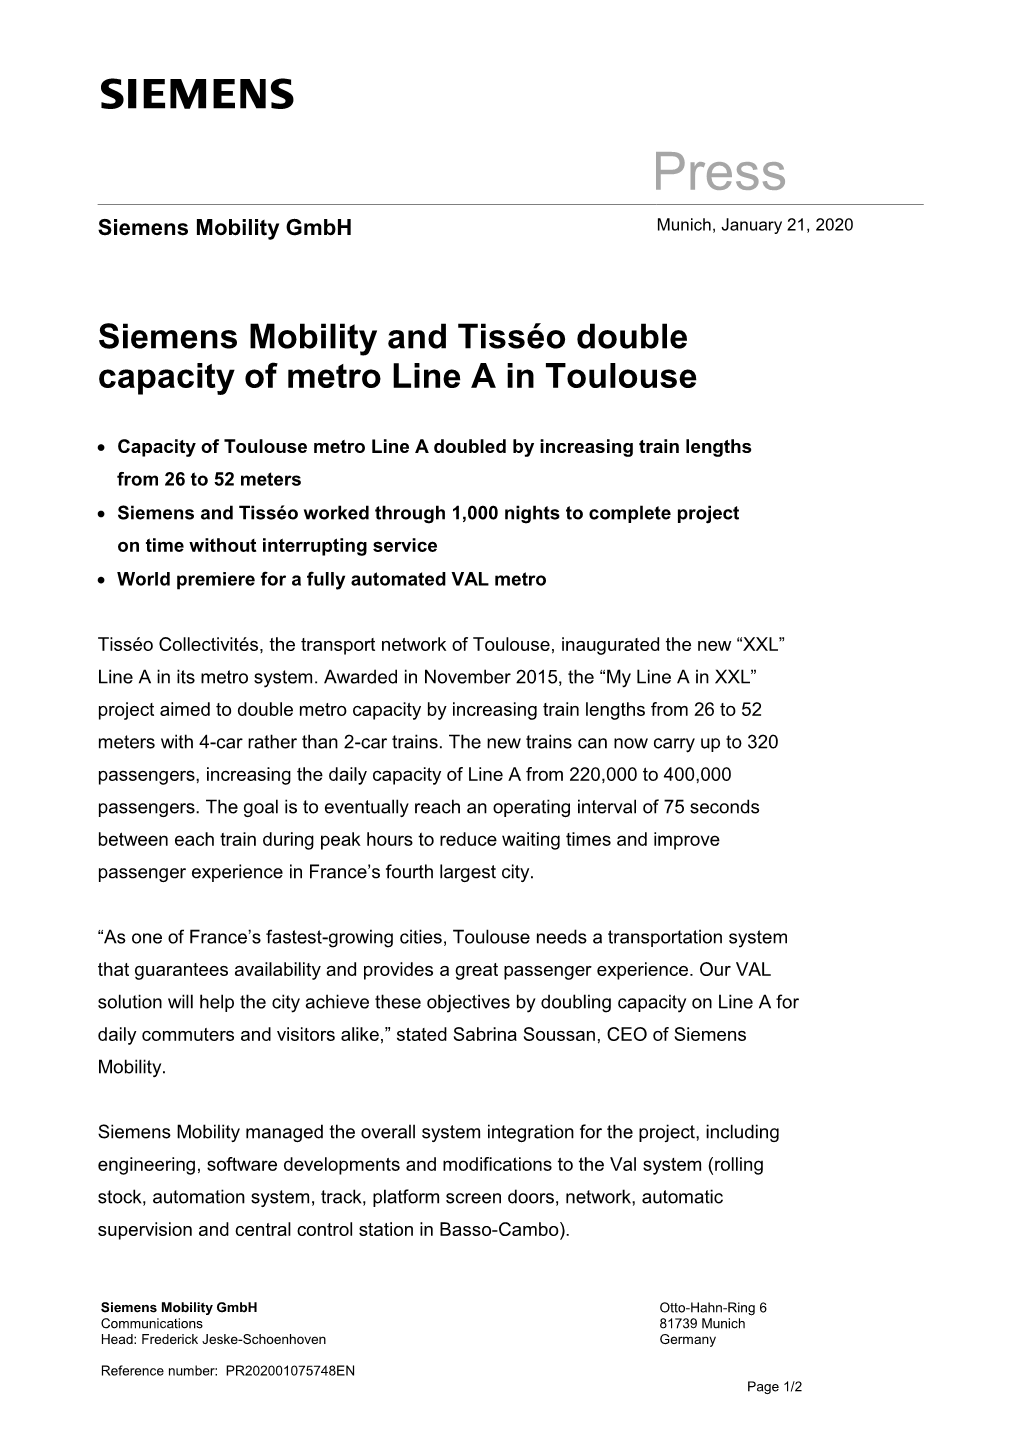 Siemens Mobility and Tisséo Double Capacity of Metro Line a in Toulouse